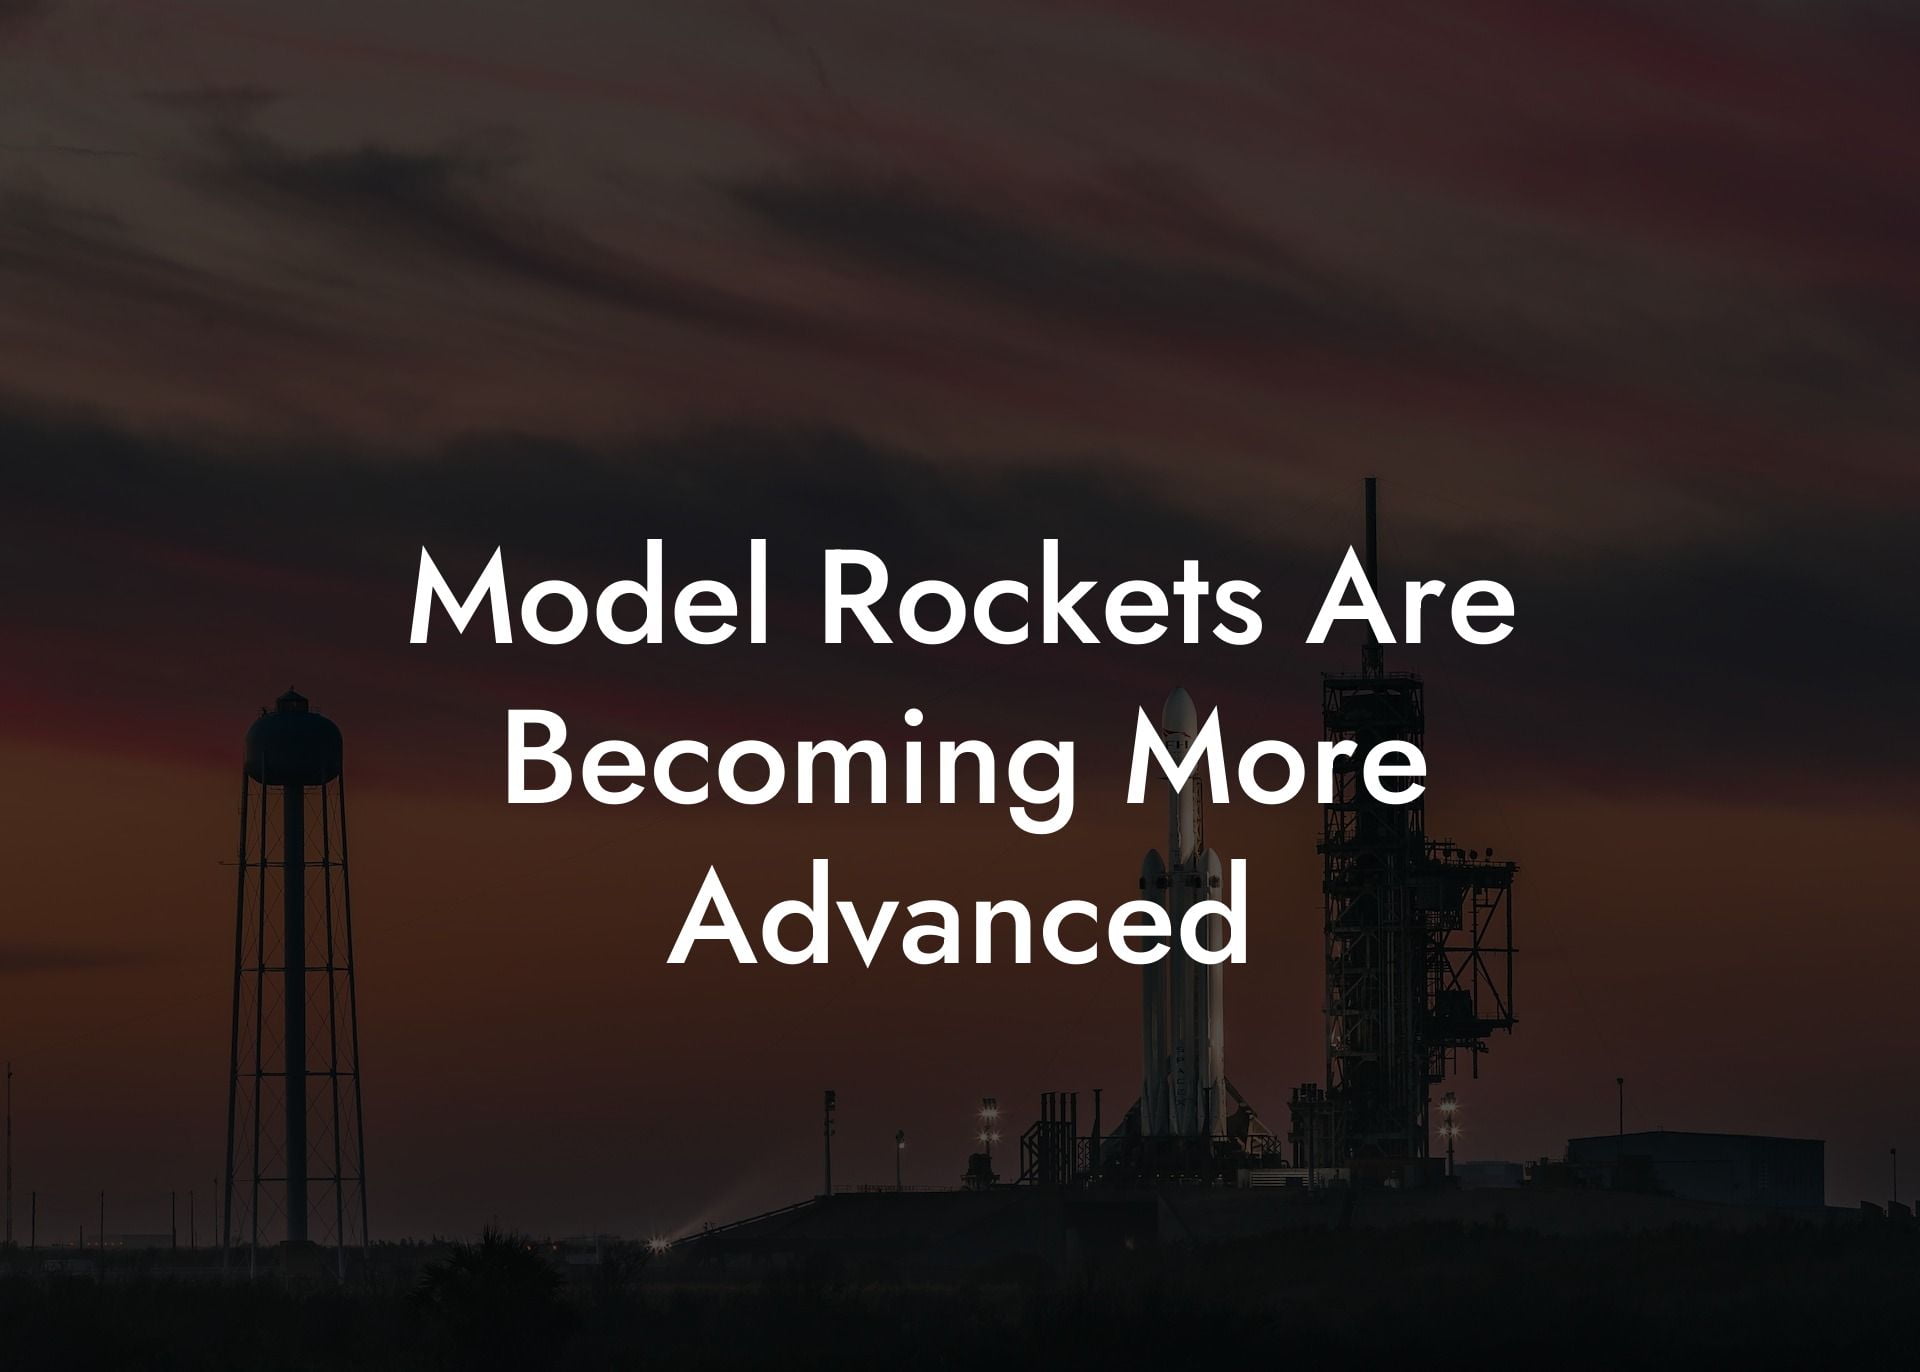 Model Rockets Are Becoming More Advanced